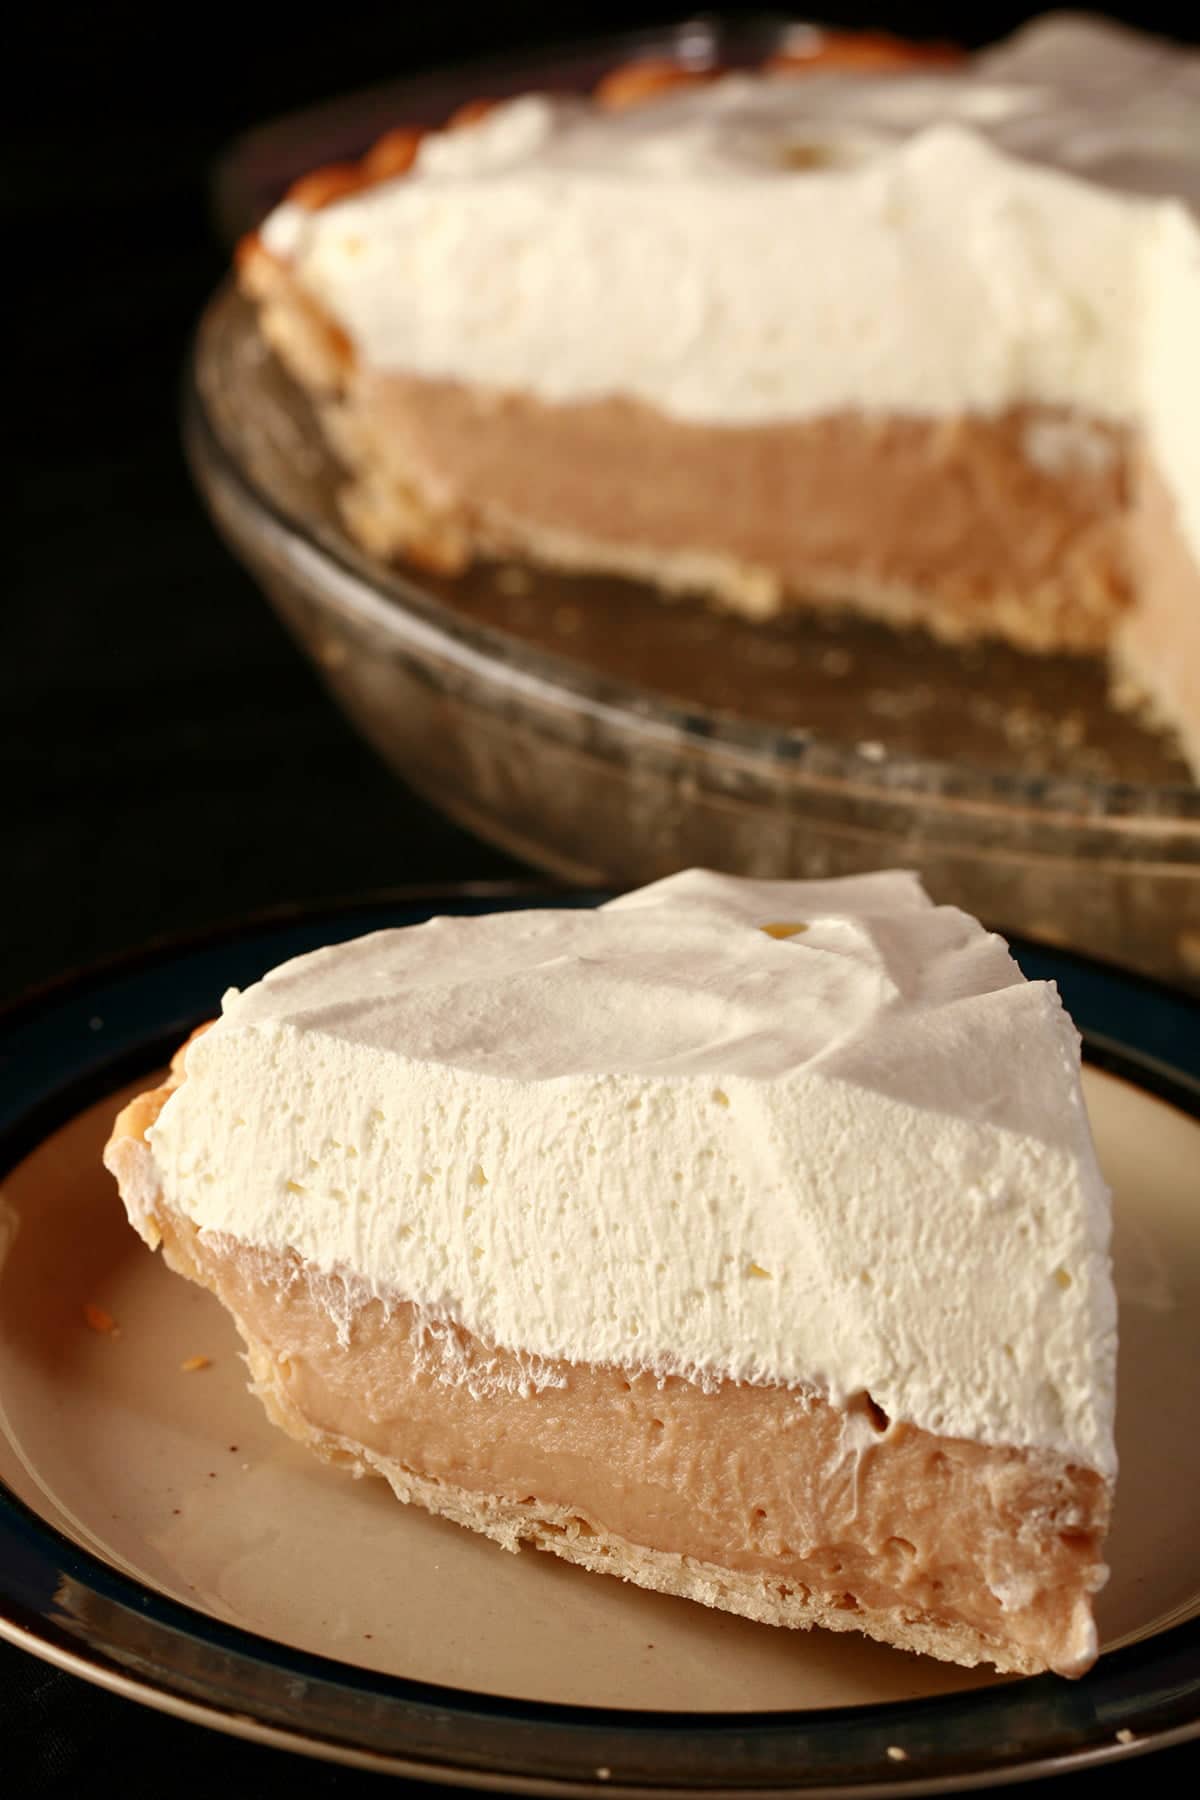 A slice of Earl Grey Custard Pie - A greige custard pie, topped with whipped cream.